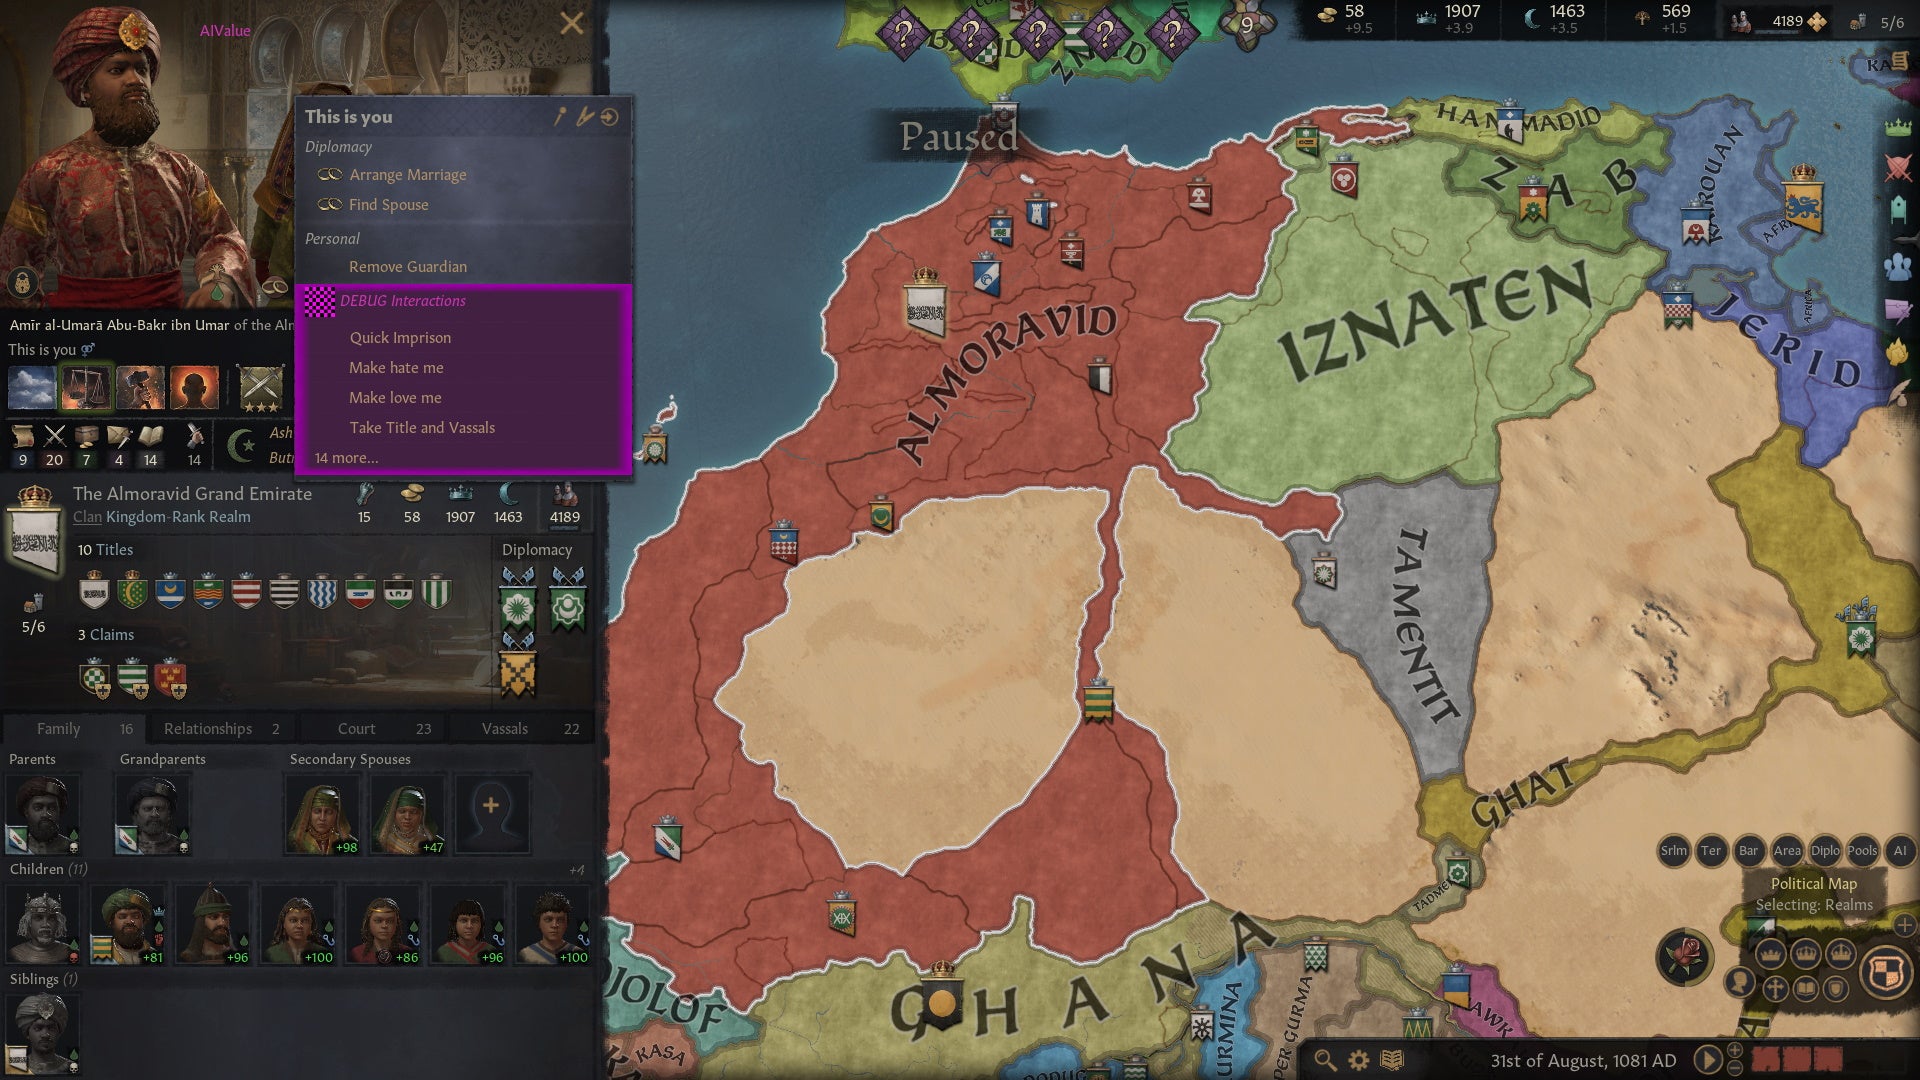 Image for Crusader Kings 3 cheats, debug mode, and console commands